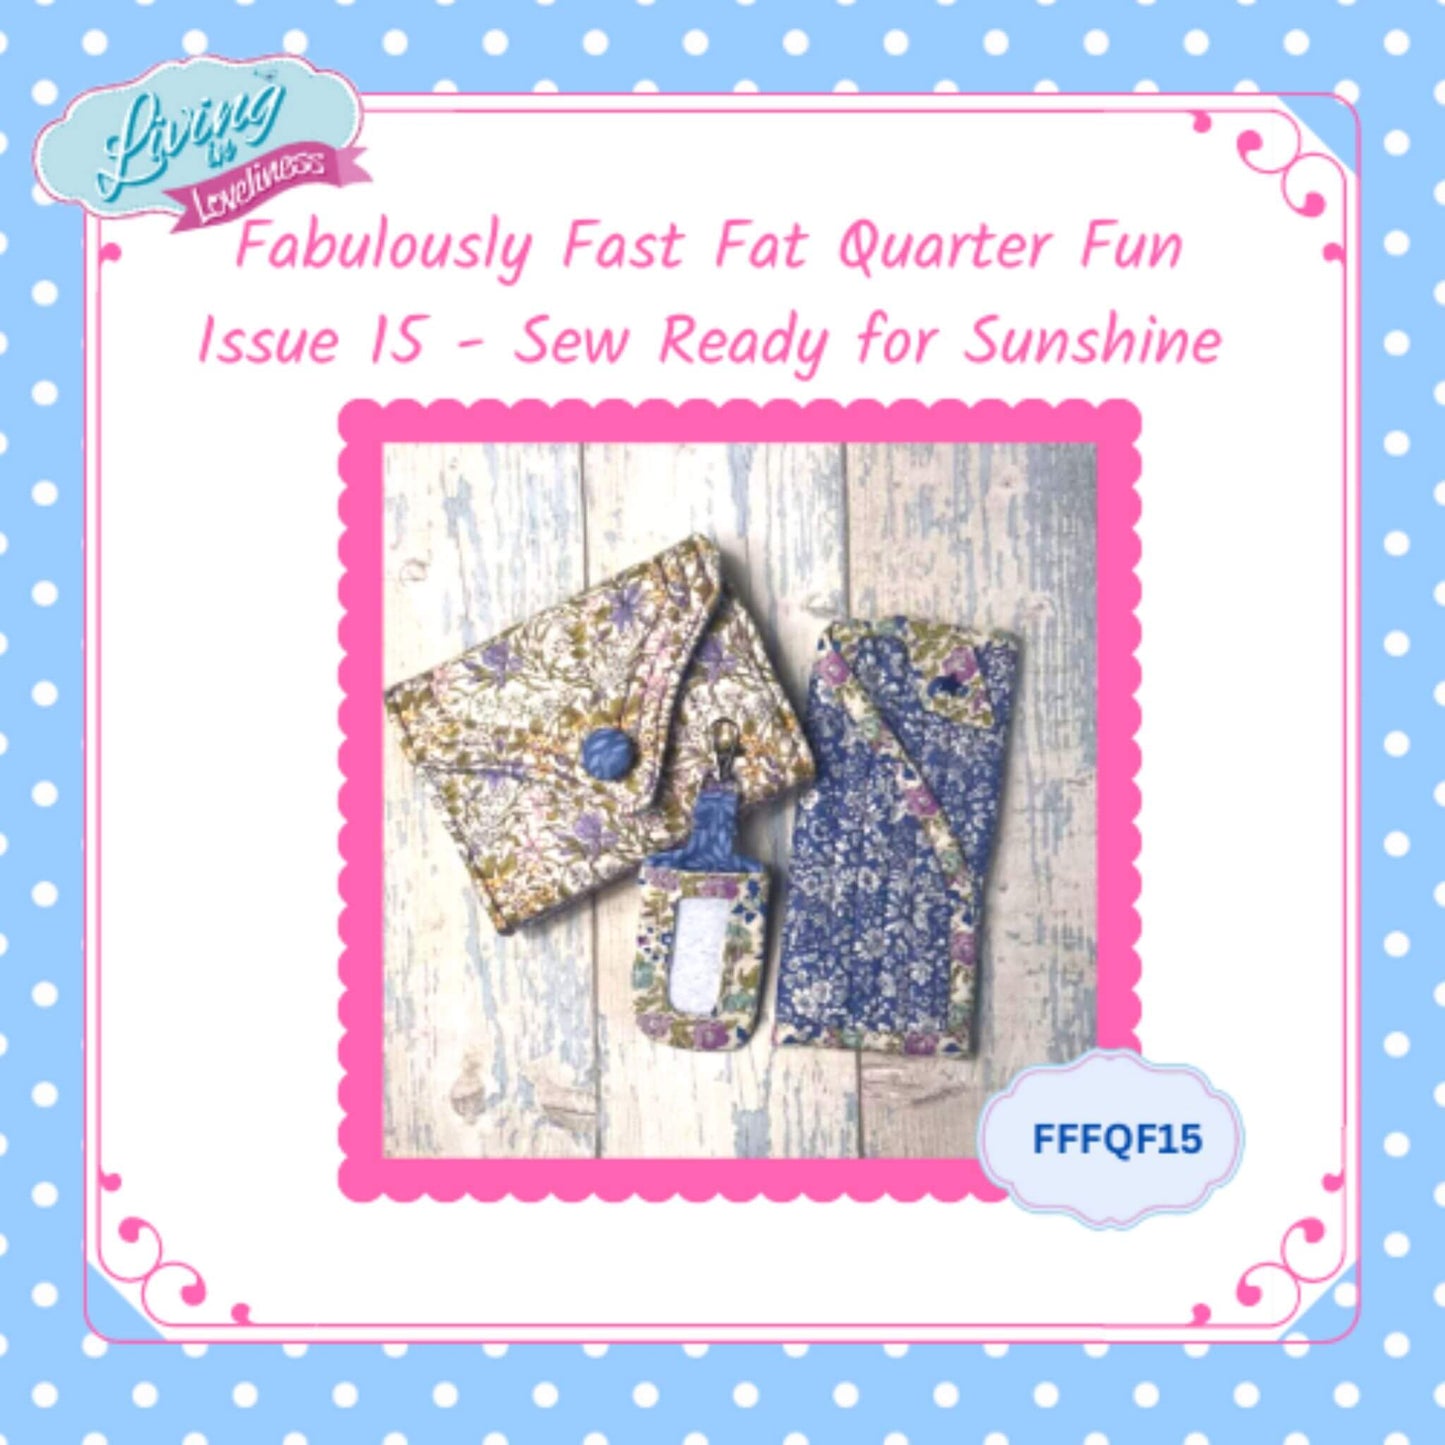 Issue 16 - Sew Wash and Dry - The Fabulously Fast Fat Quarter Fun Series by Living in Loveliness